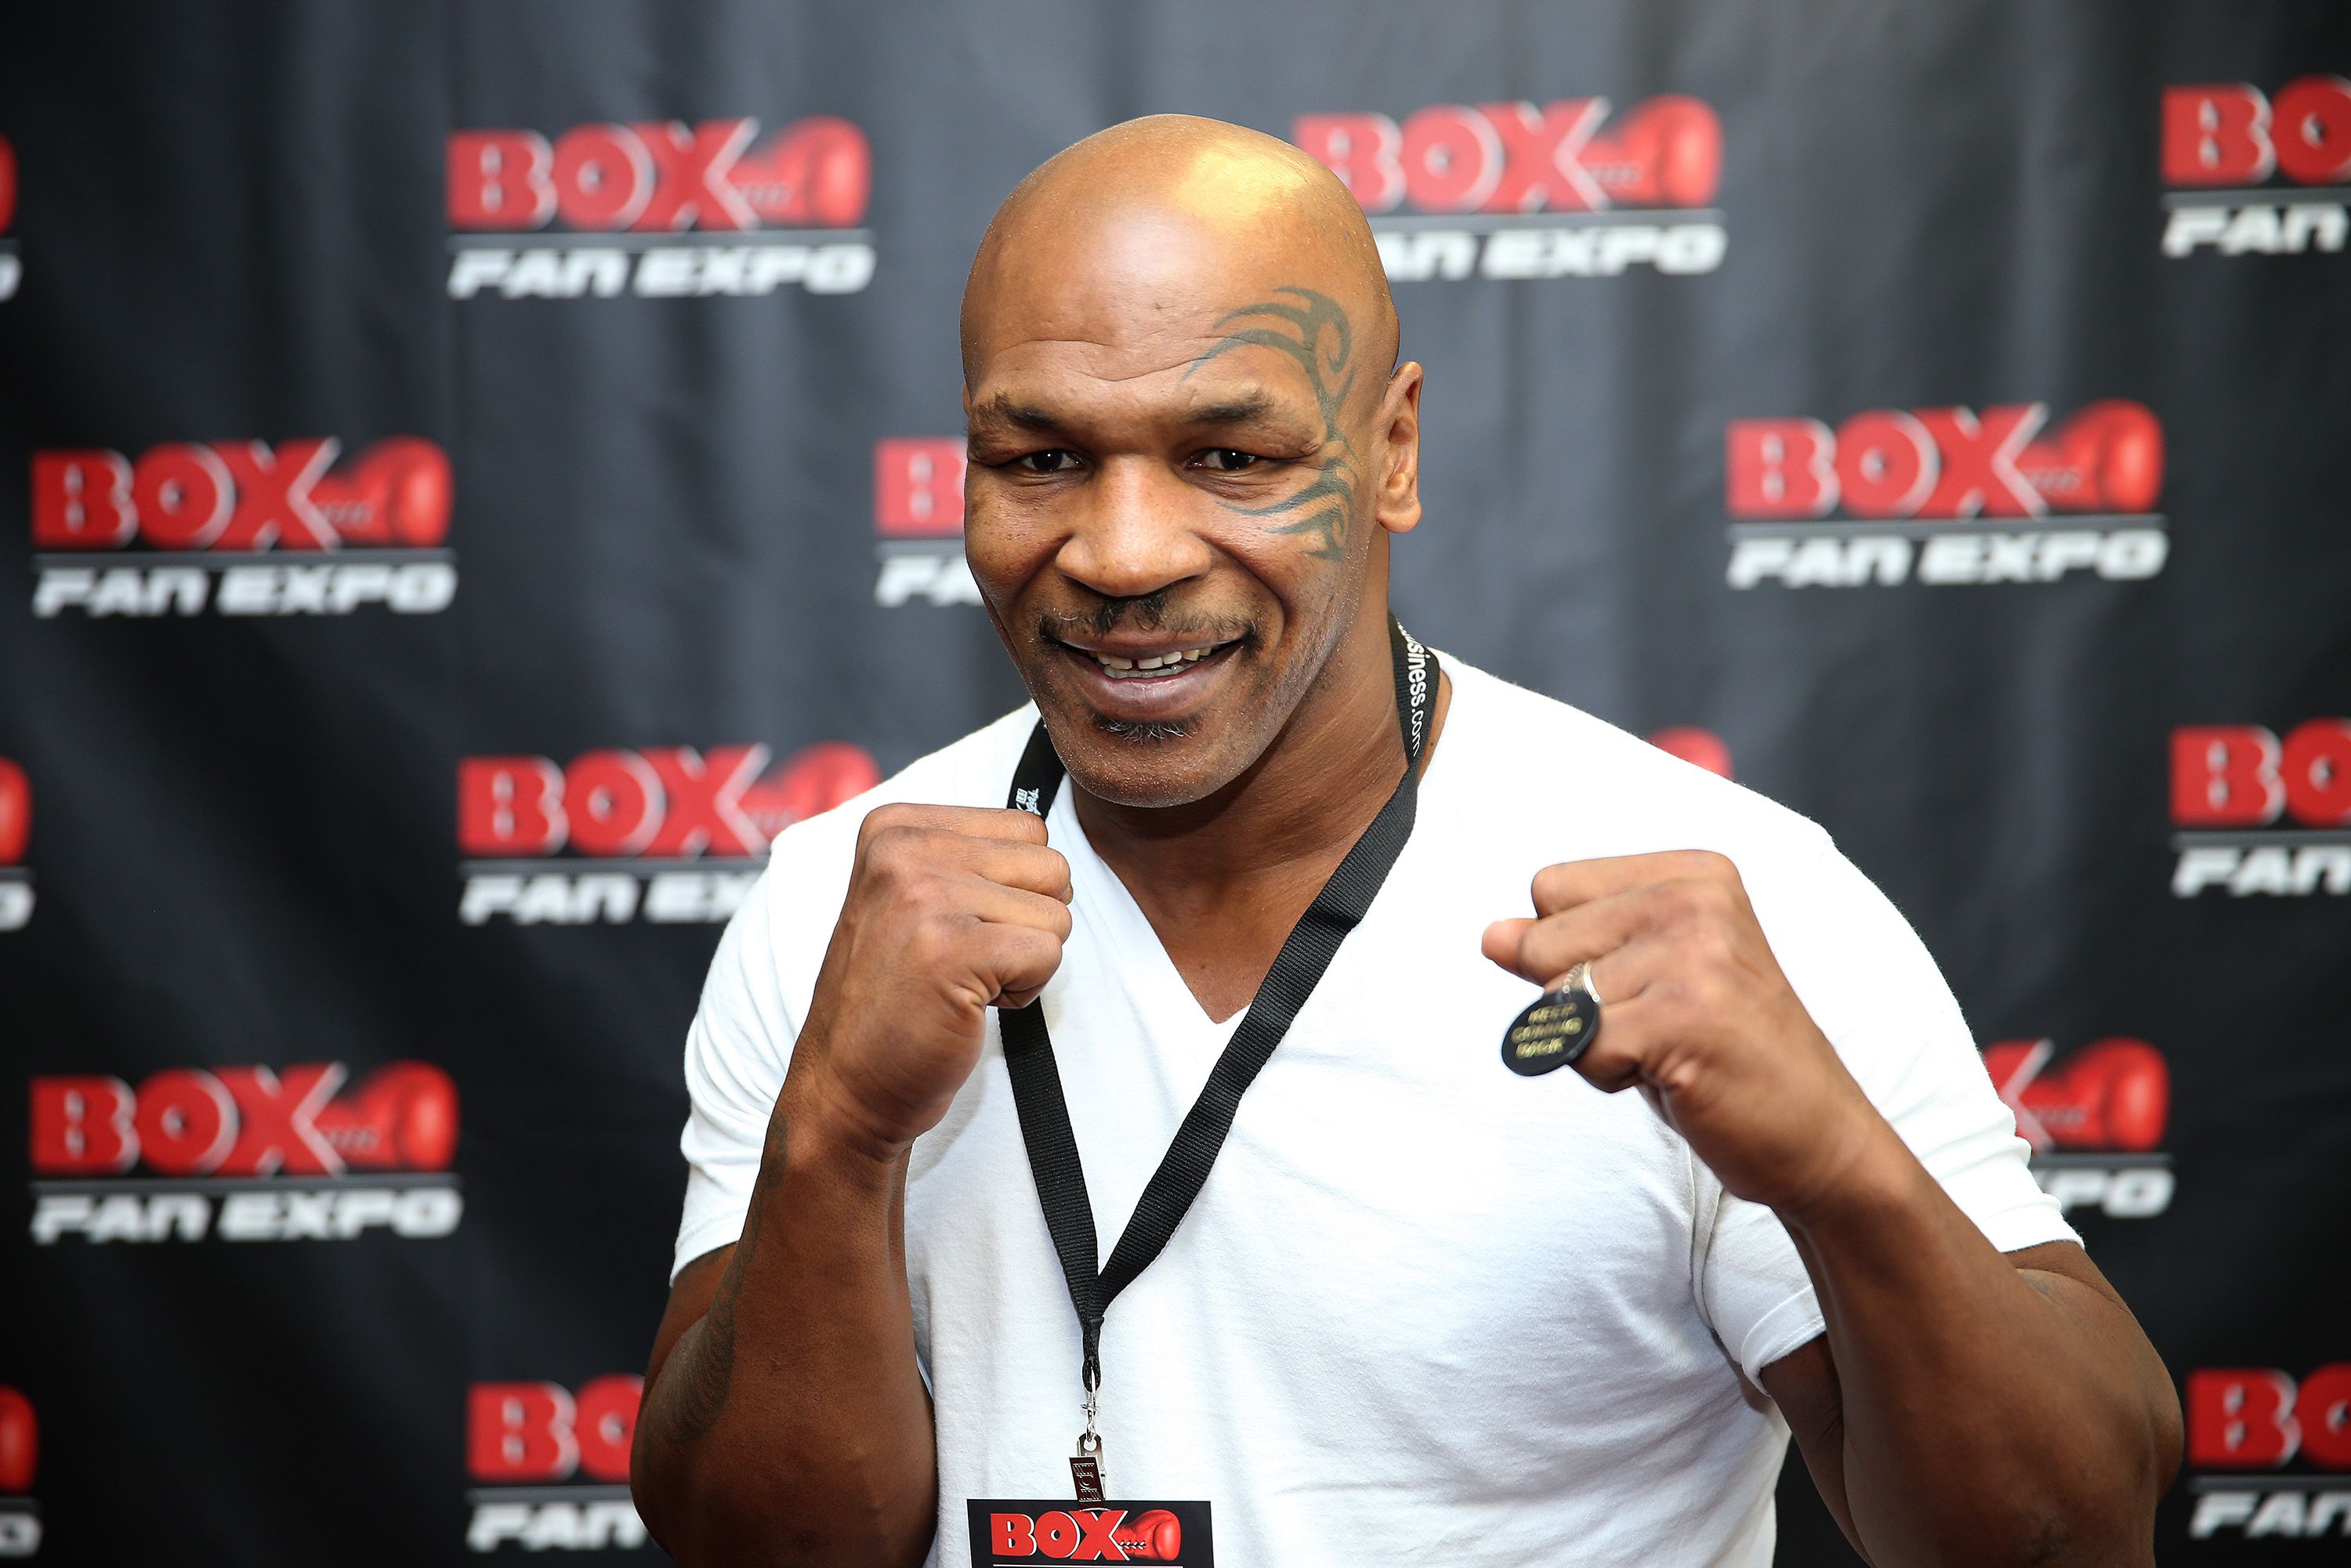 nintendo switch mike tyson punch out